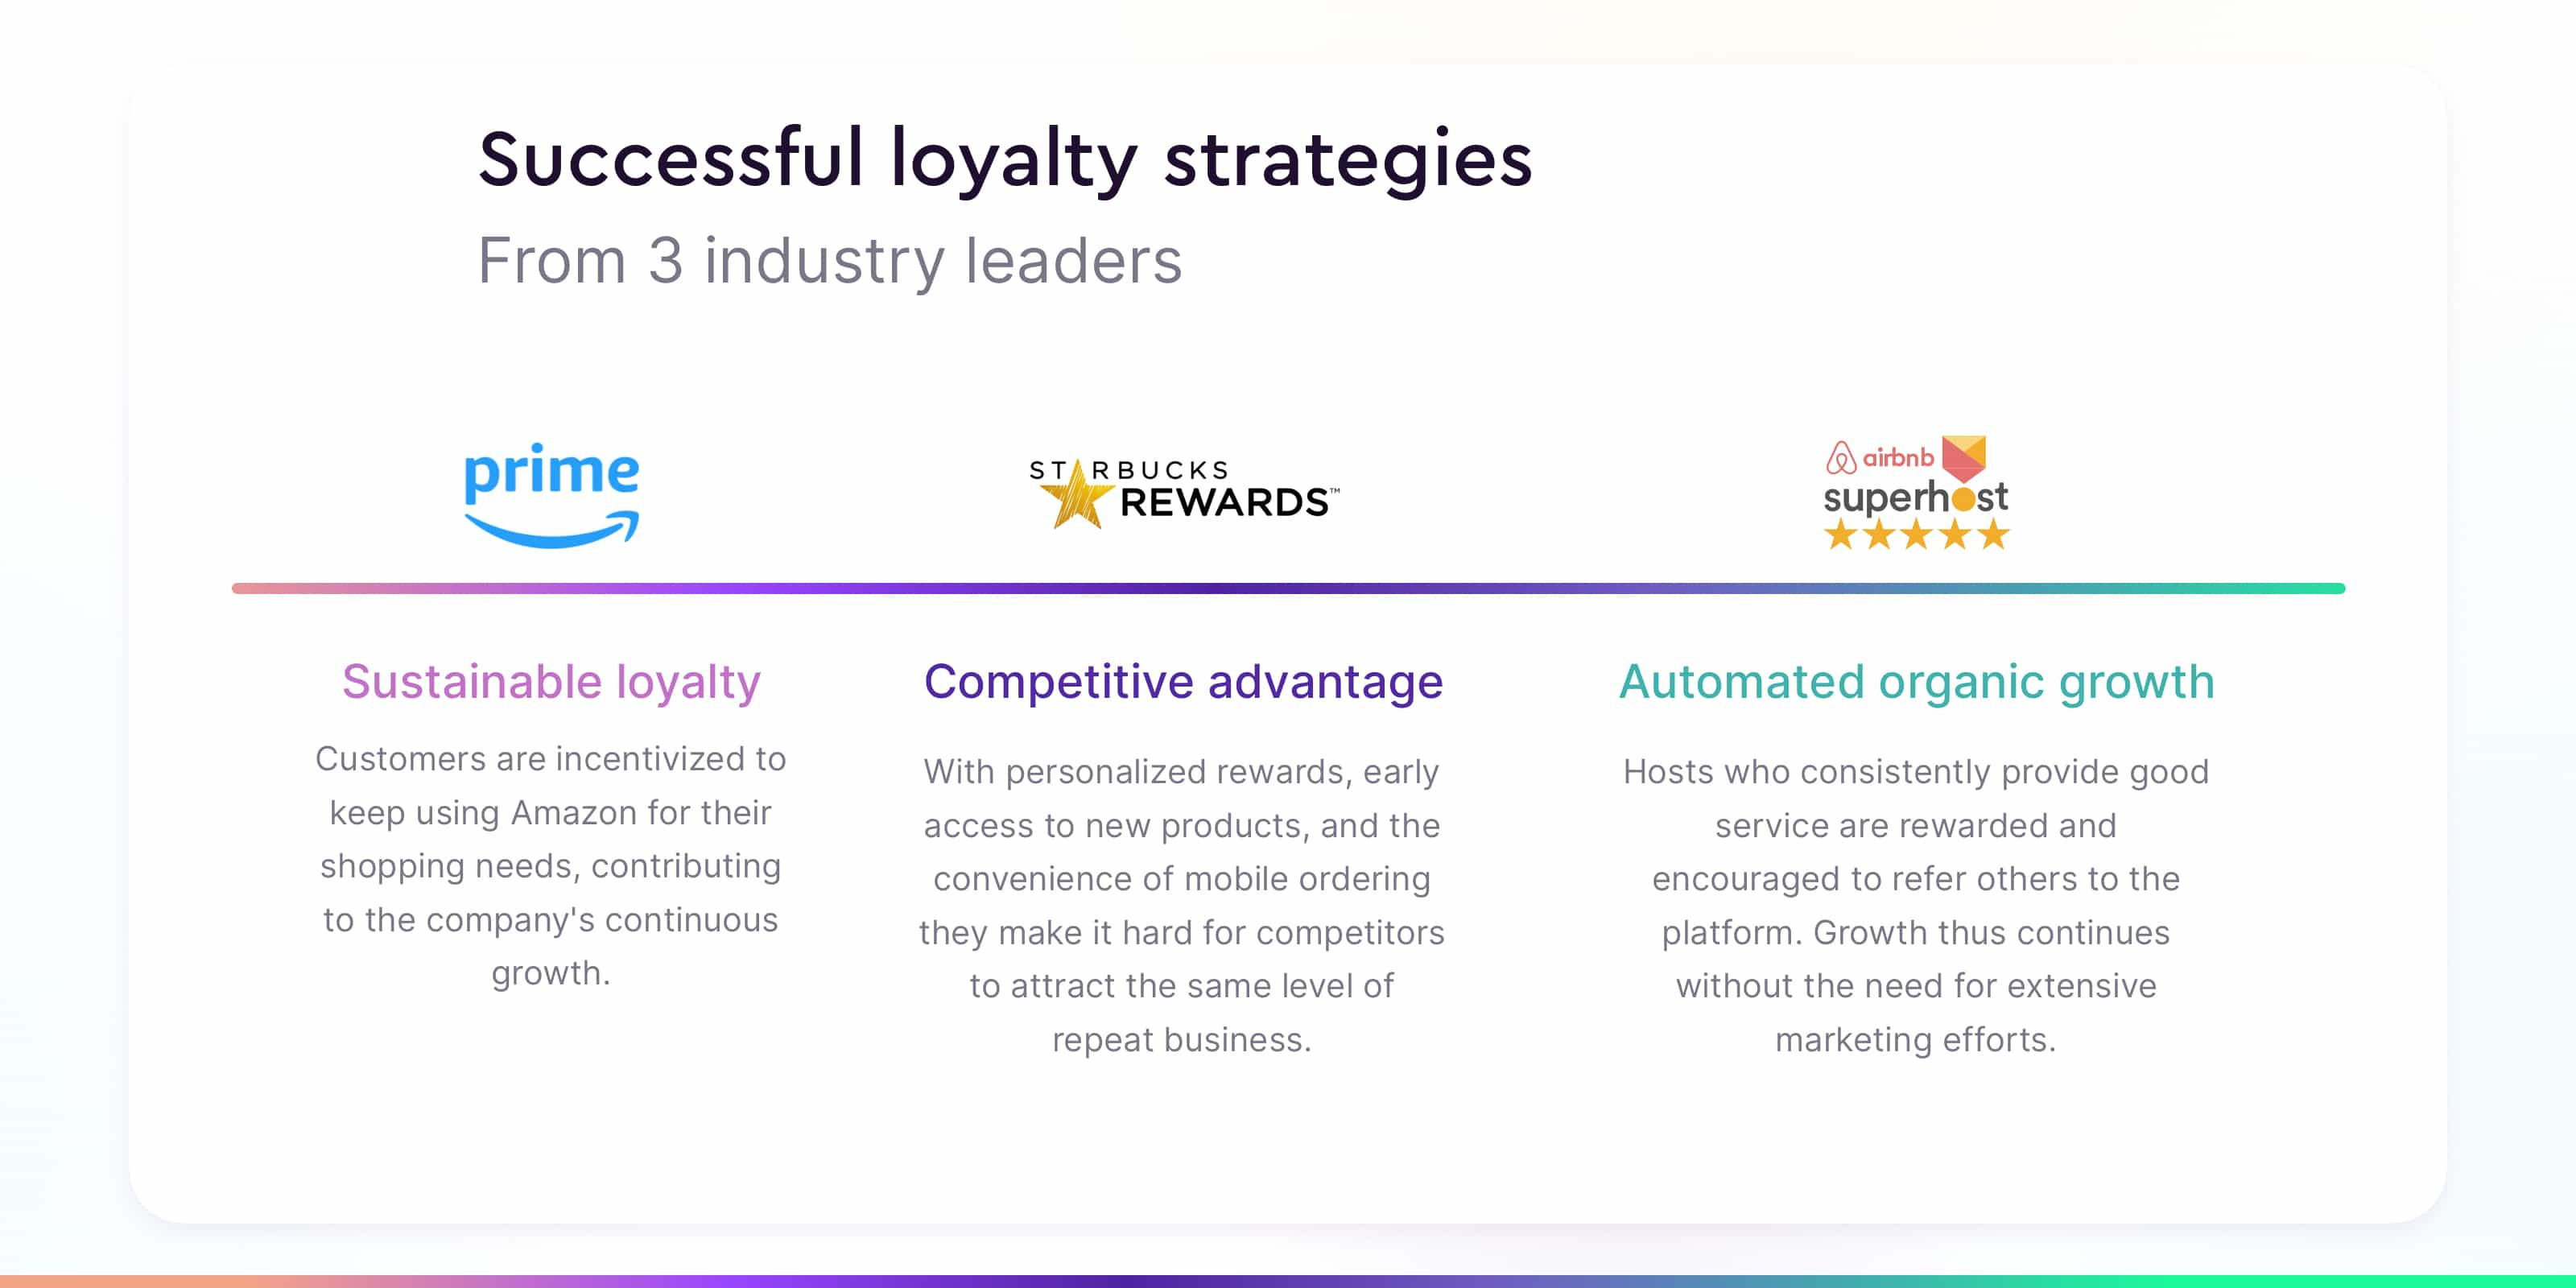 Loyalty program benefits with 3 industry leaders 